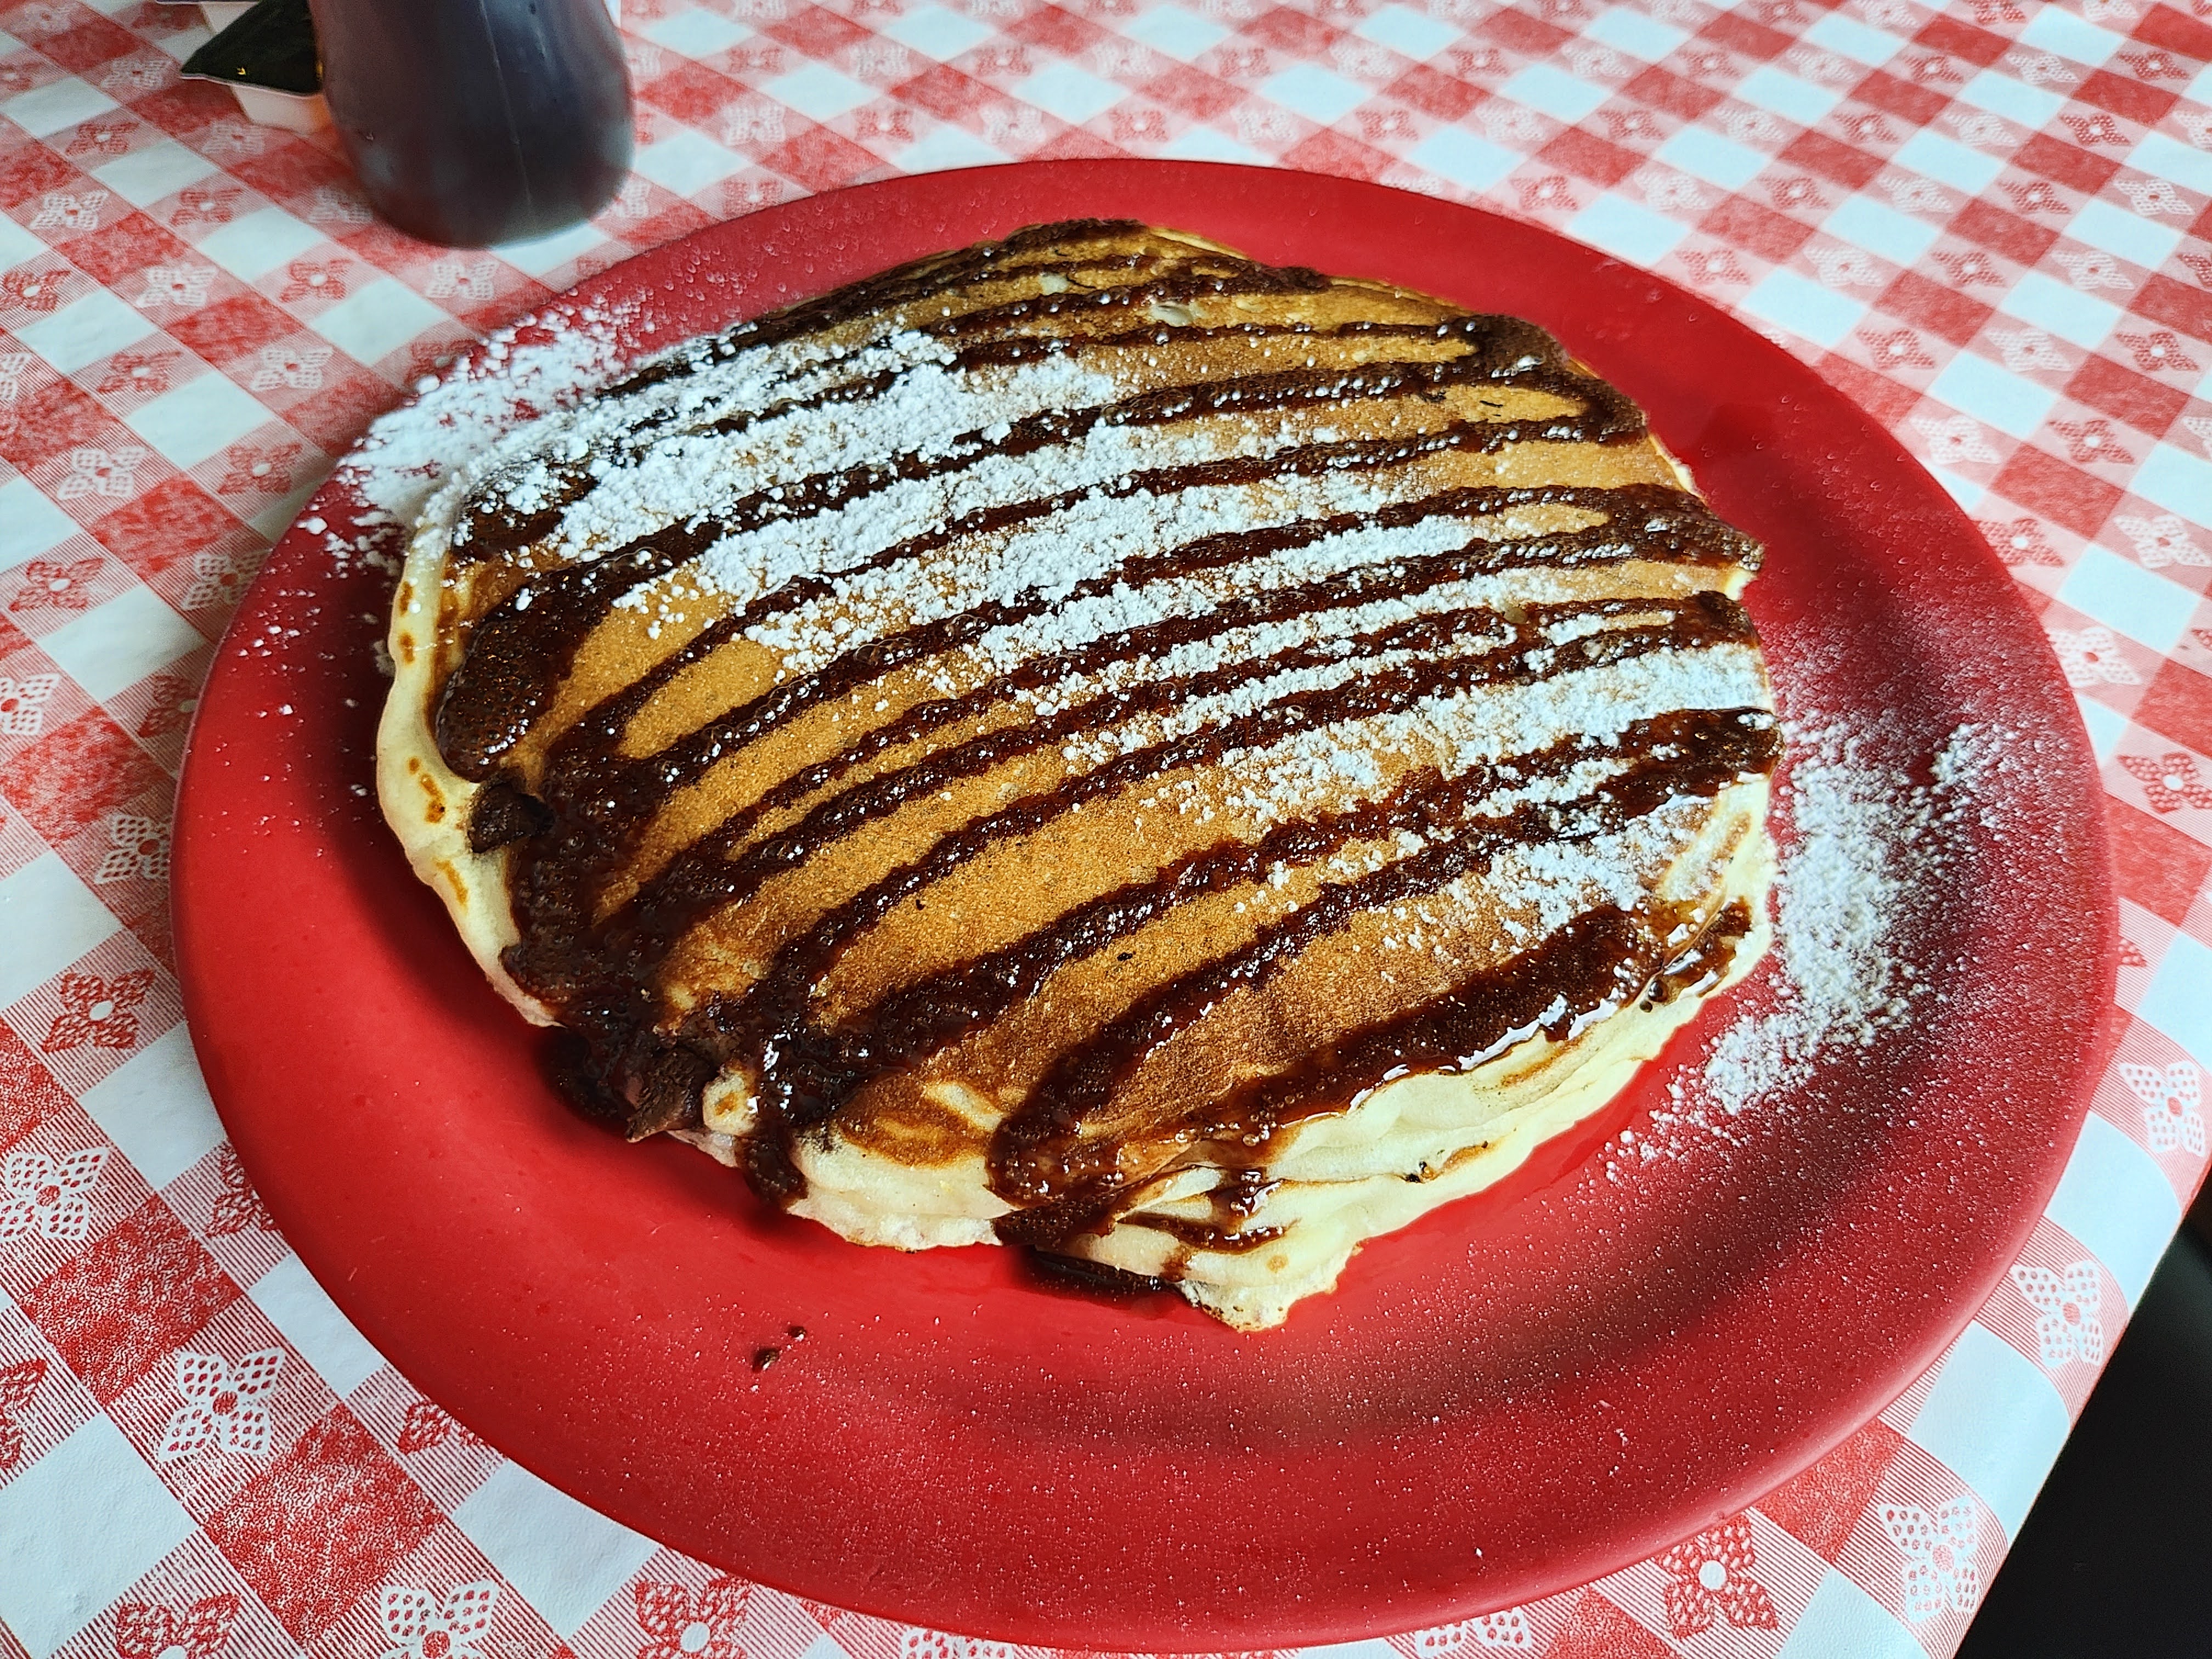 Chocolate chip pancakes on a red plate, taken with the Motorola Razr Plus.